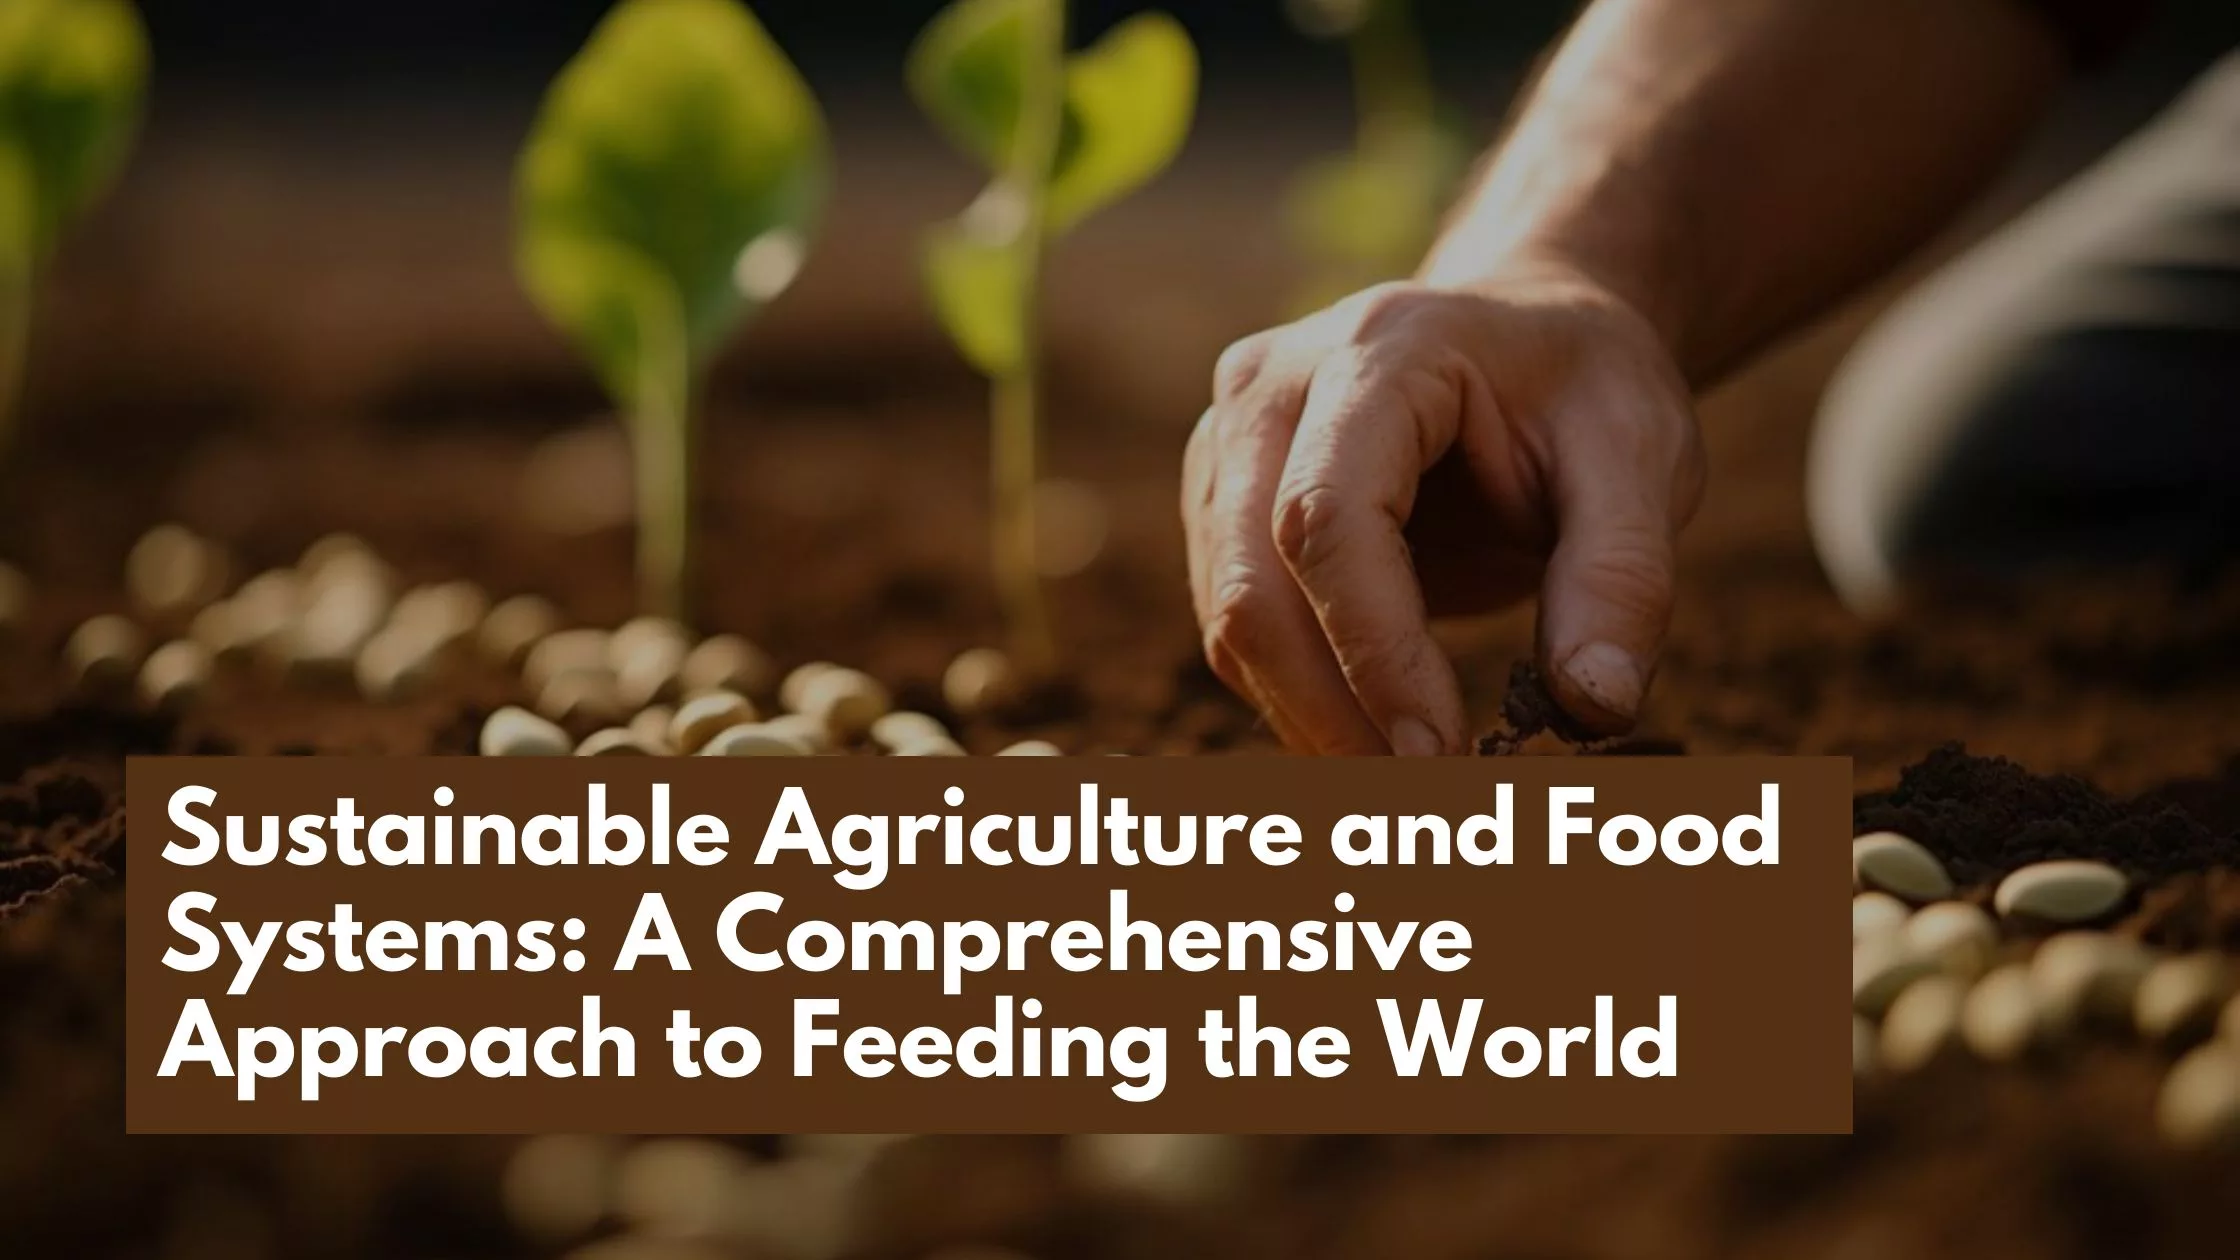 Sustainable Agriculture and Food Systems: A Comprehensive Approach to Feeding the World